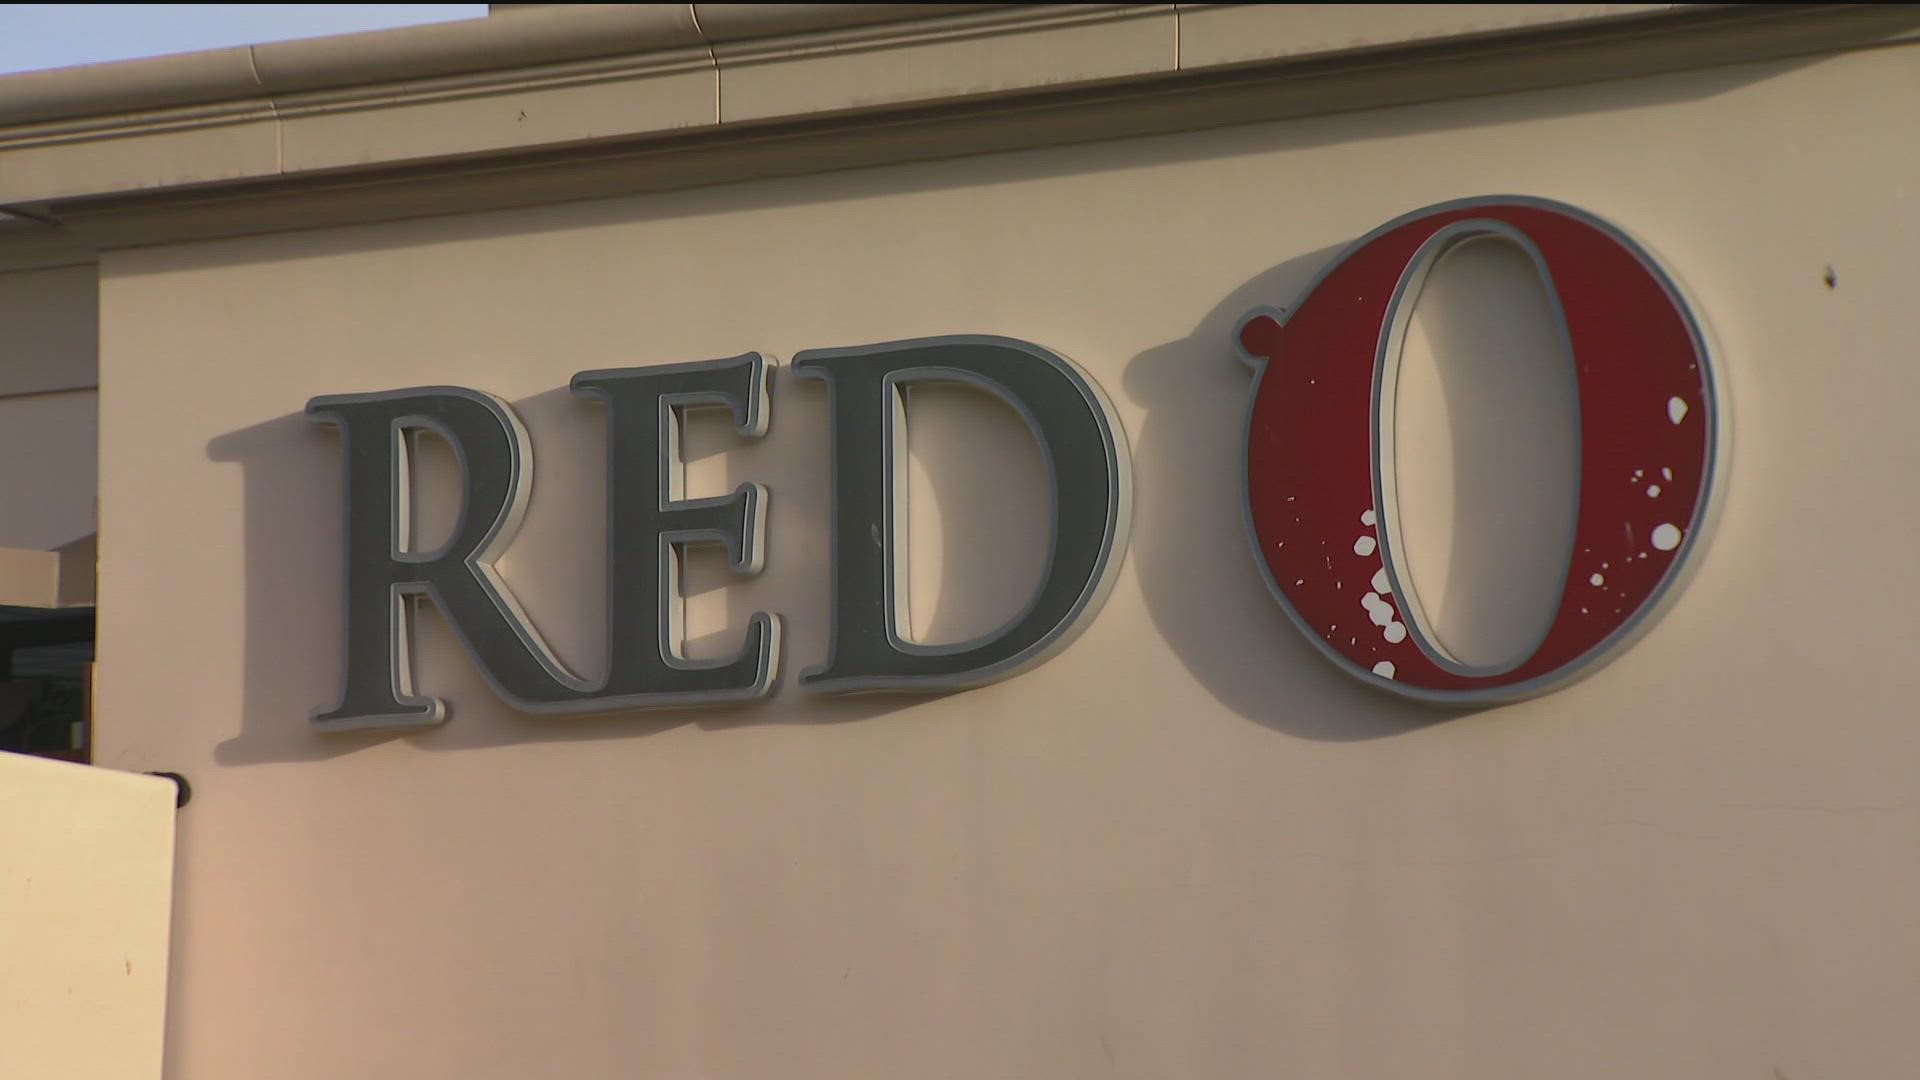 The Red O Restaurant in La Jolla serves what they call elevated Mexican cuisine and gourmet cocktails.